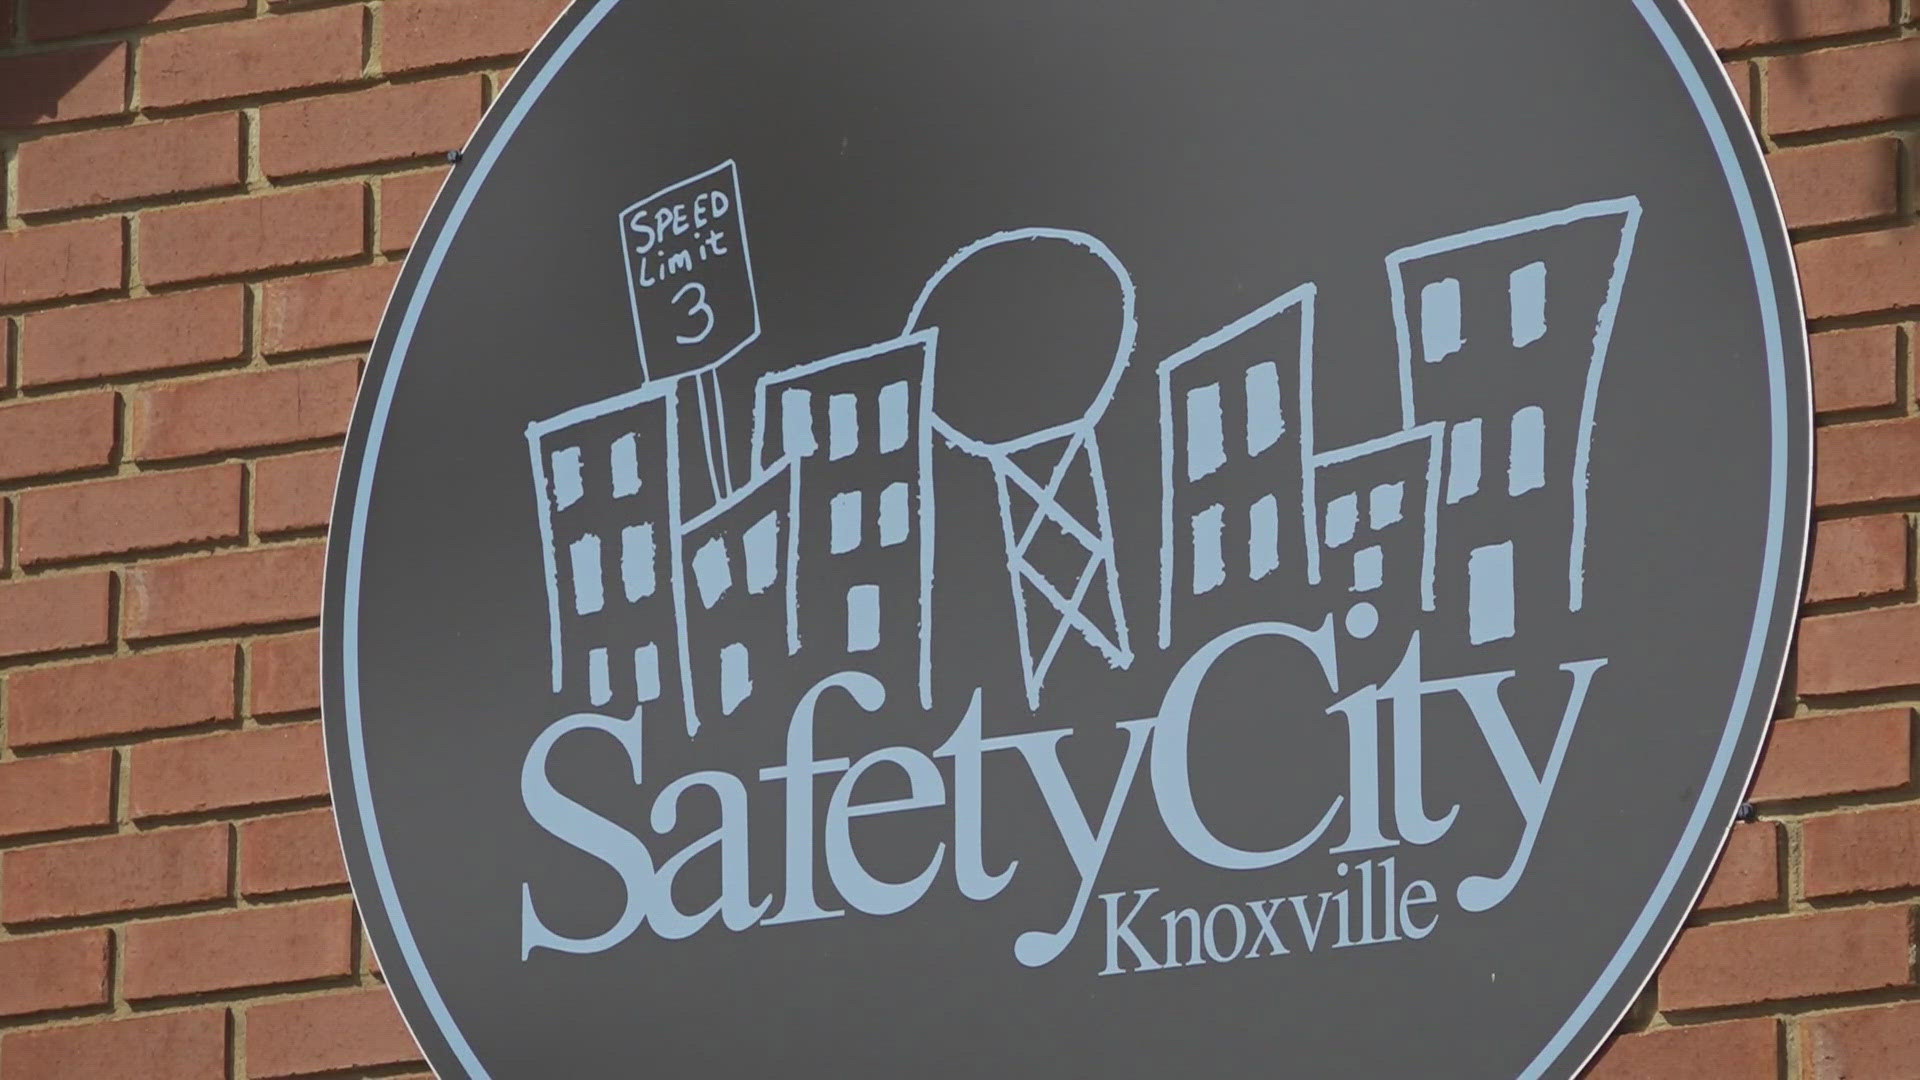 Safety City is meant to teach children about vehicular, pedestrian, bicycle and fire safety.